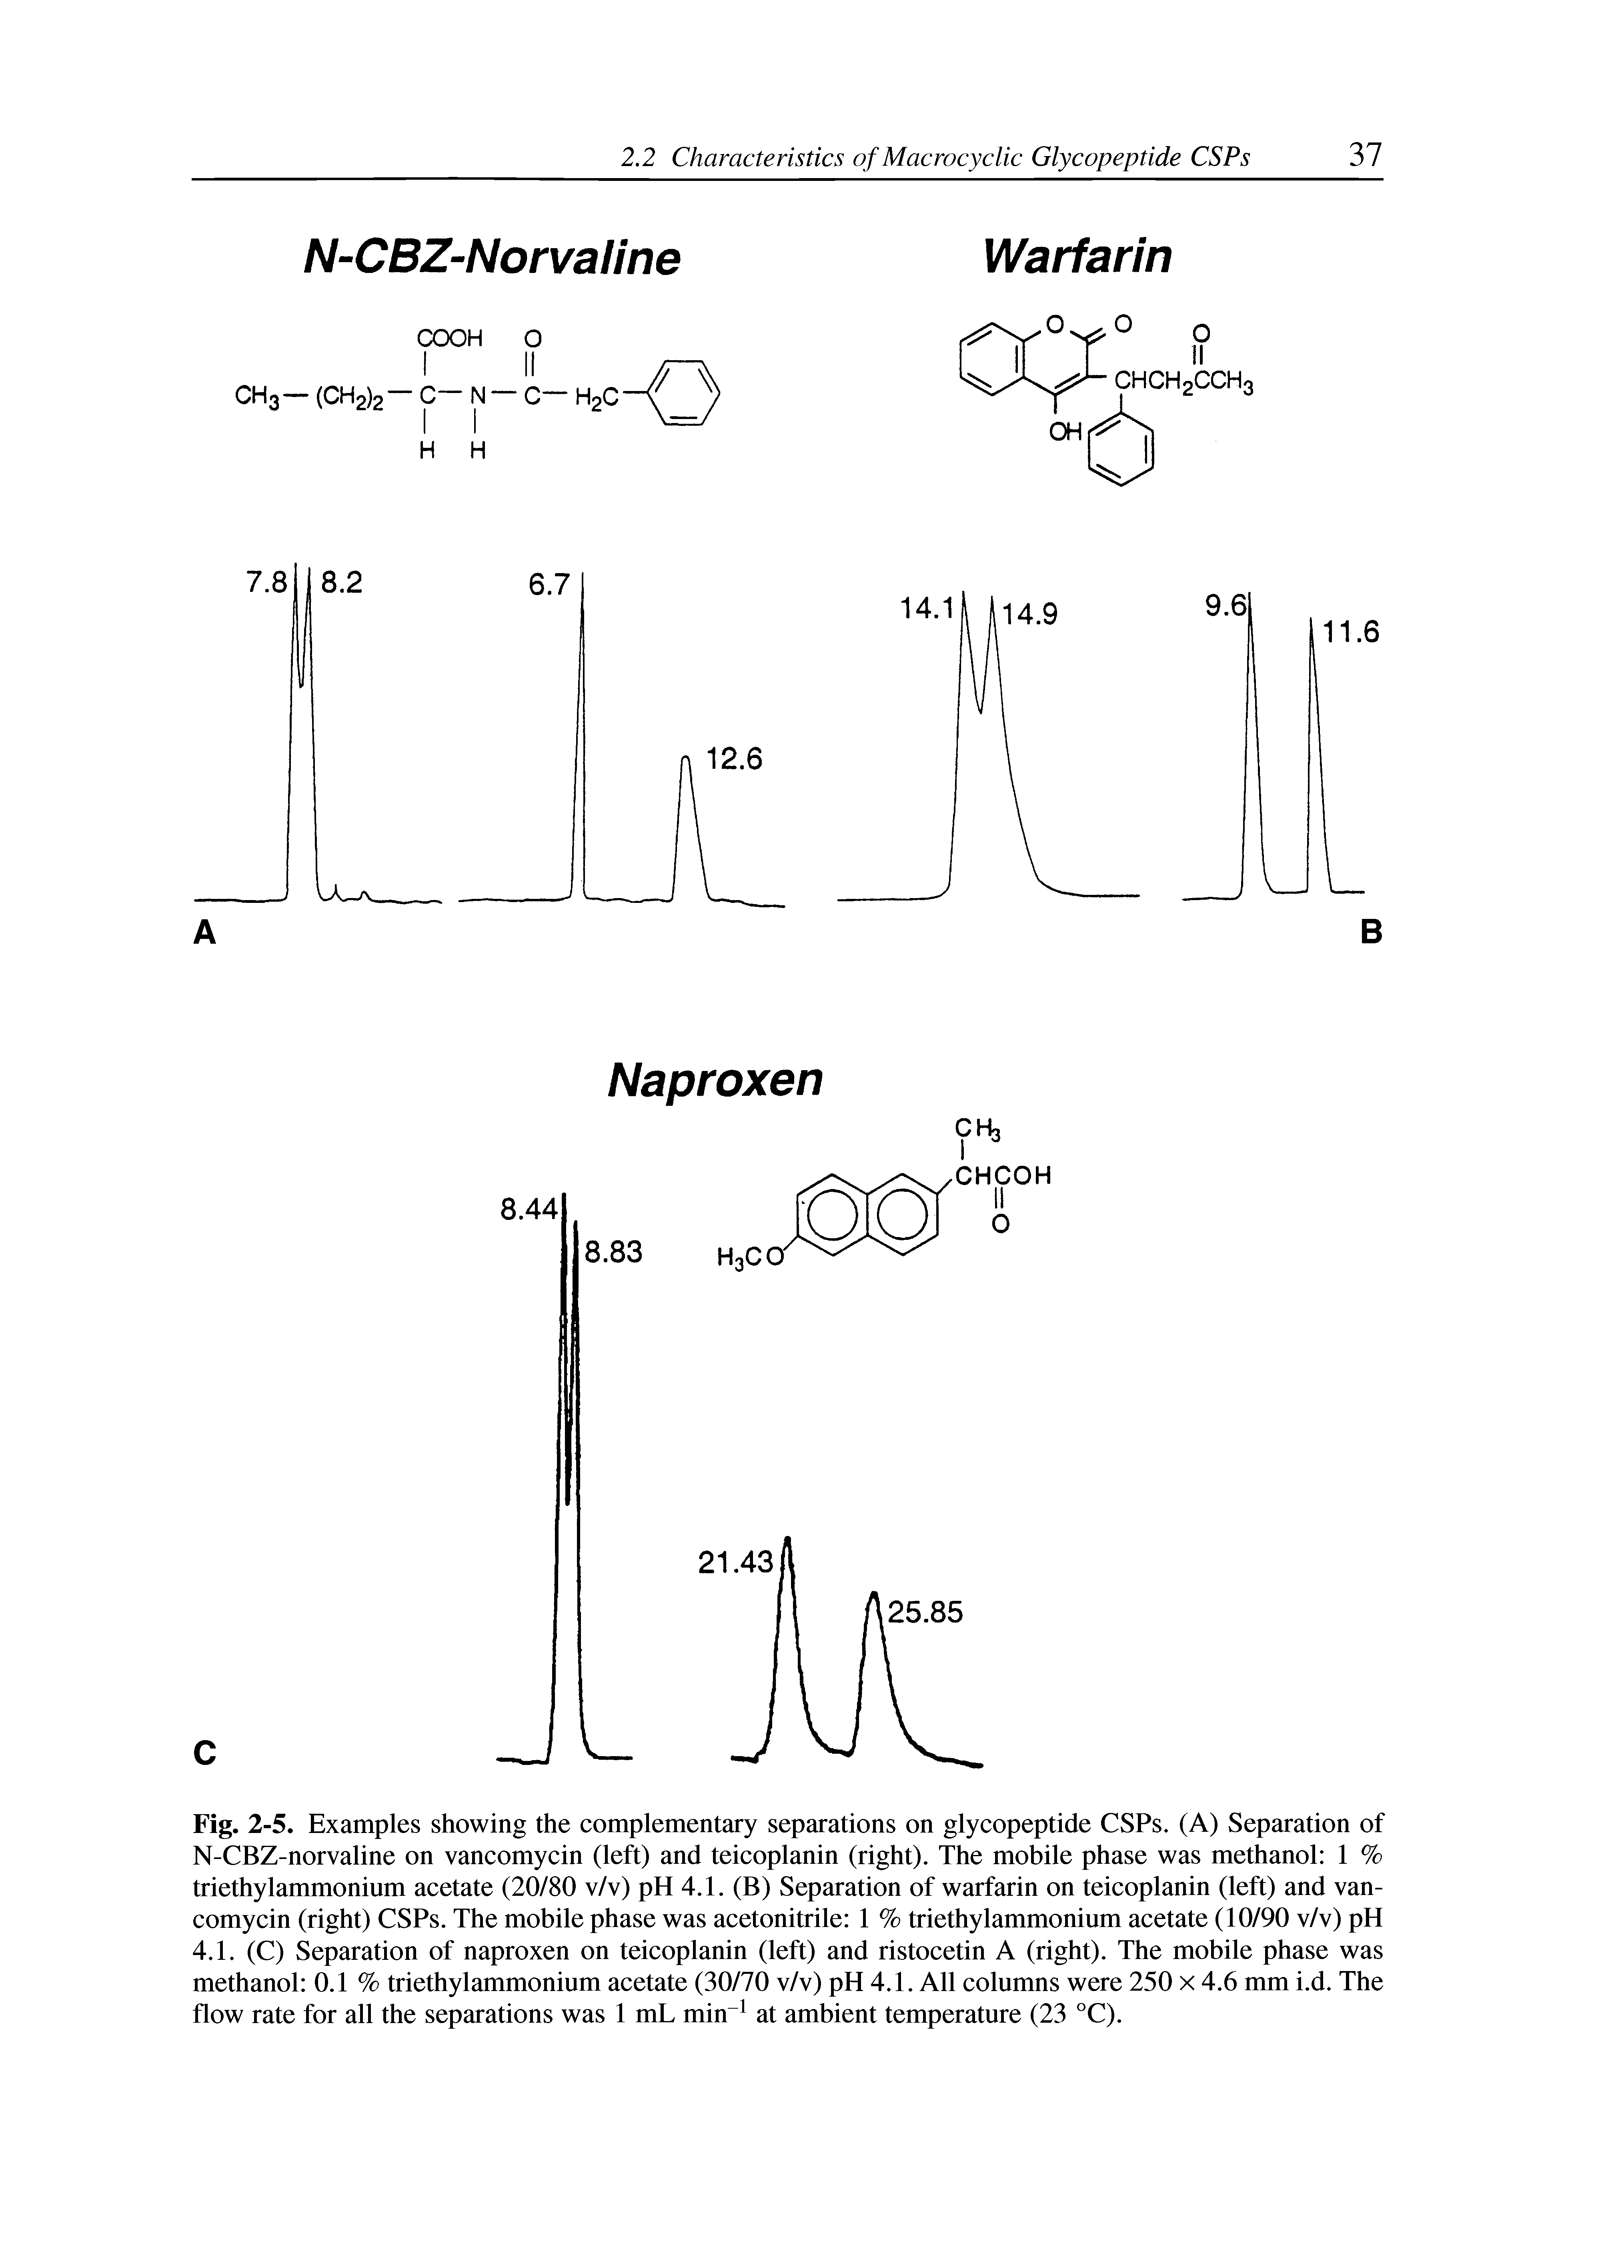 Fig. 2-5. Examples showing the complementary separations on glycopeptide CSPs. (A) Separation of N-CBZ-norvaline on vancomycin (left) and teicoplanin (right). The mobile phase was methanol 1 % triethylammonium acetate (20/80 v/v) pH 4.1. (B) Separation of warfarin on teicoplanin (left) and vancomycin (right) CSPs. The mobile phase was acetonitrile 1 % triethylammonium acetate (10/90 v/v) pH 4.1. (C) Separation of naproxen on teicoplanin (left) and ristocetin A (right). The mobile phase was methanol 0.1 % triethylammonium acetate (30/70 v/v) pH 4.1. All columns were 250 x 4.6 mm i.d. The flow rate for all the separations was 1 mL min1 at ambient temperature (23 °C).